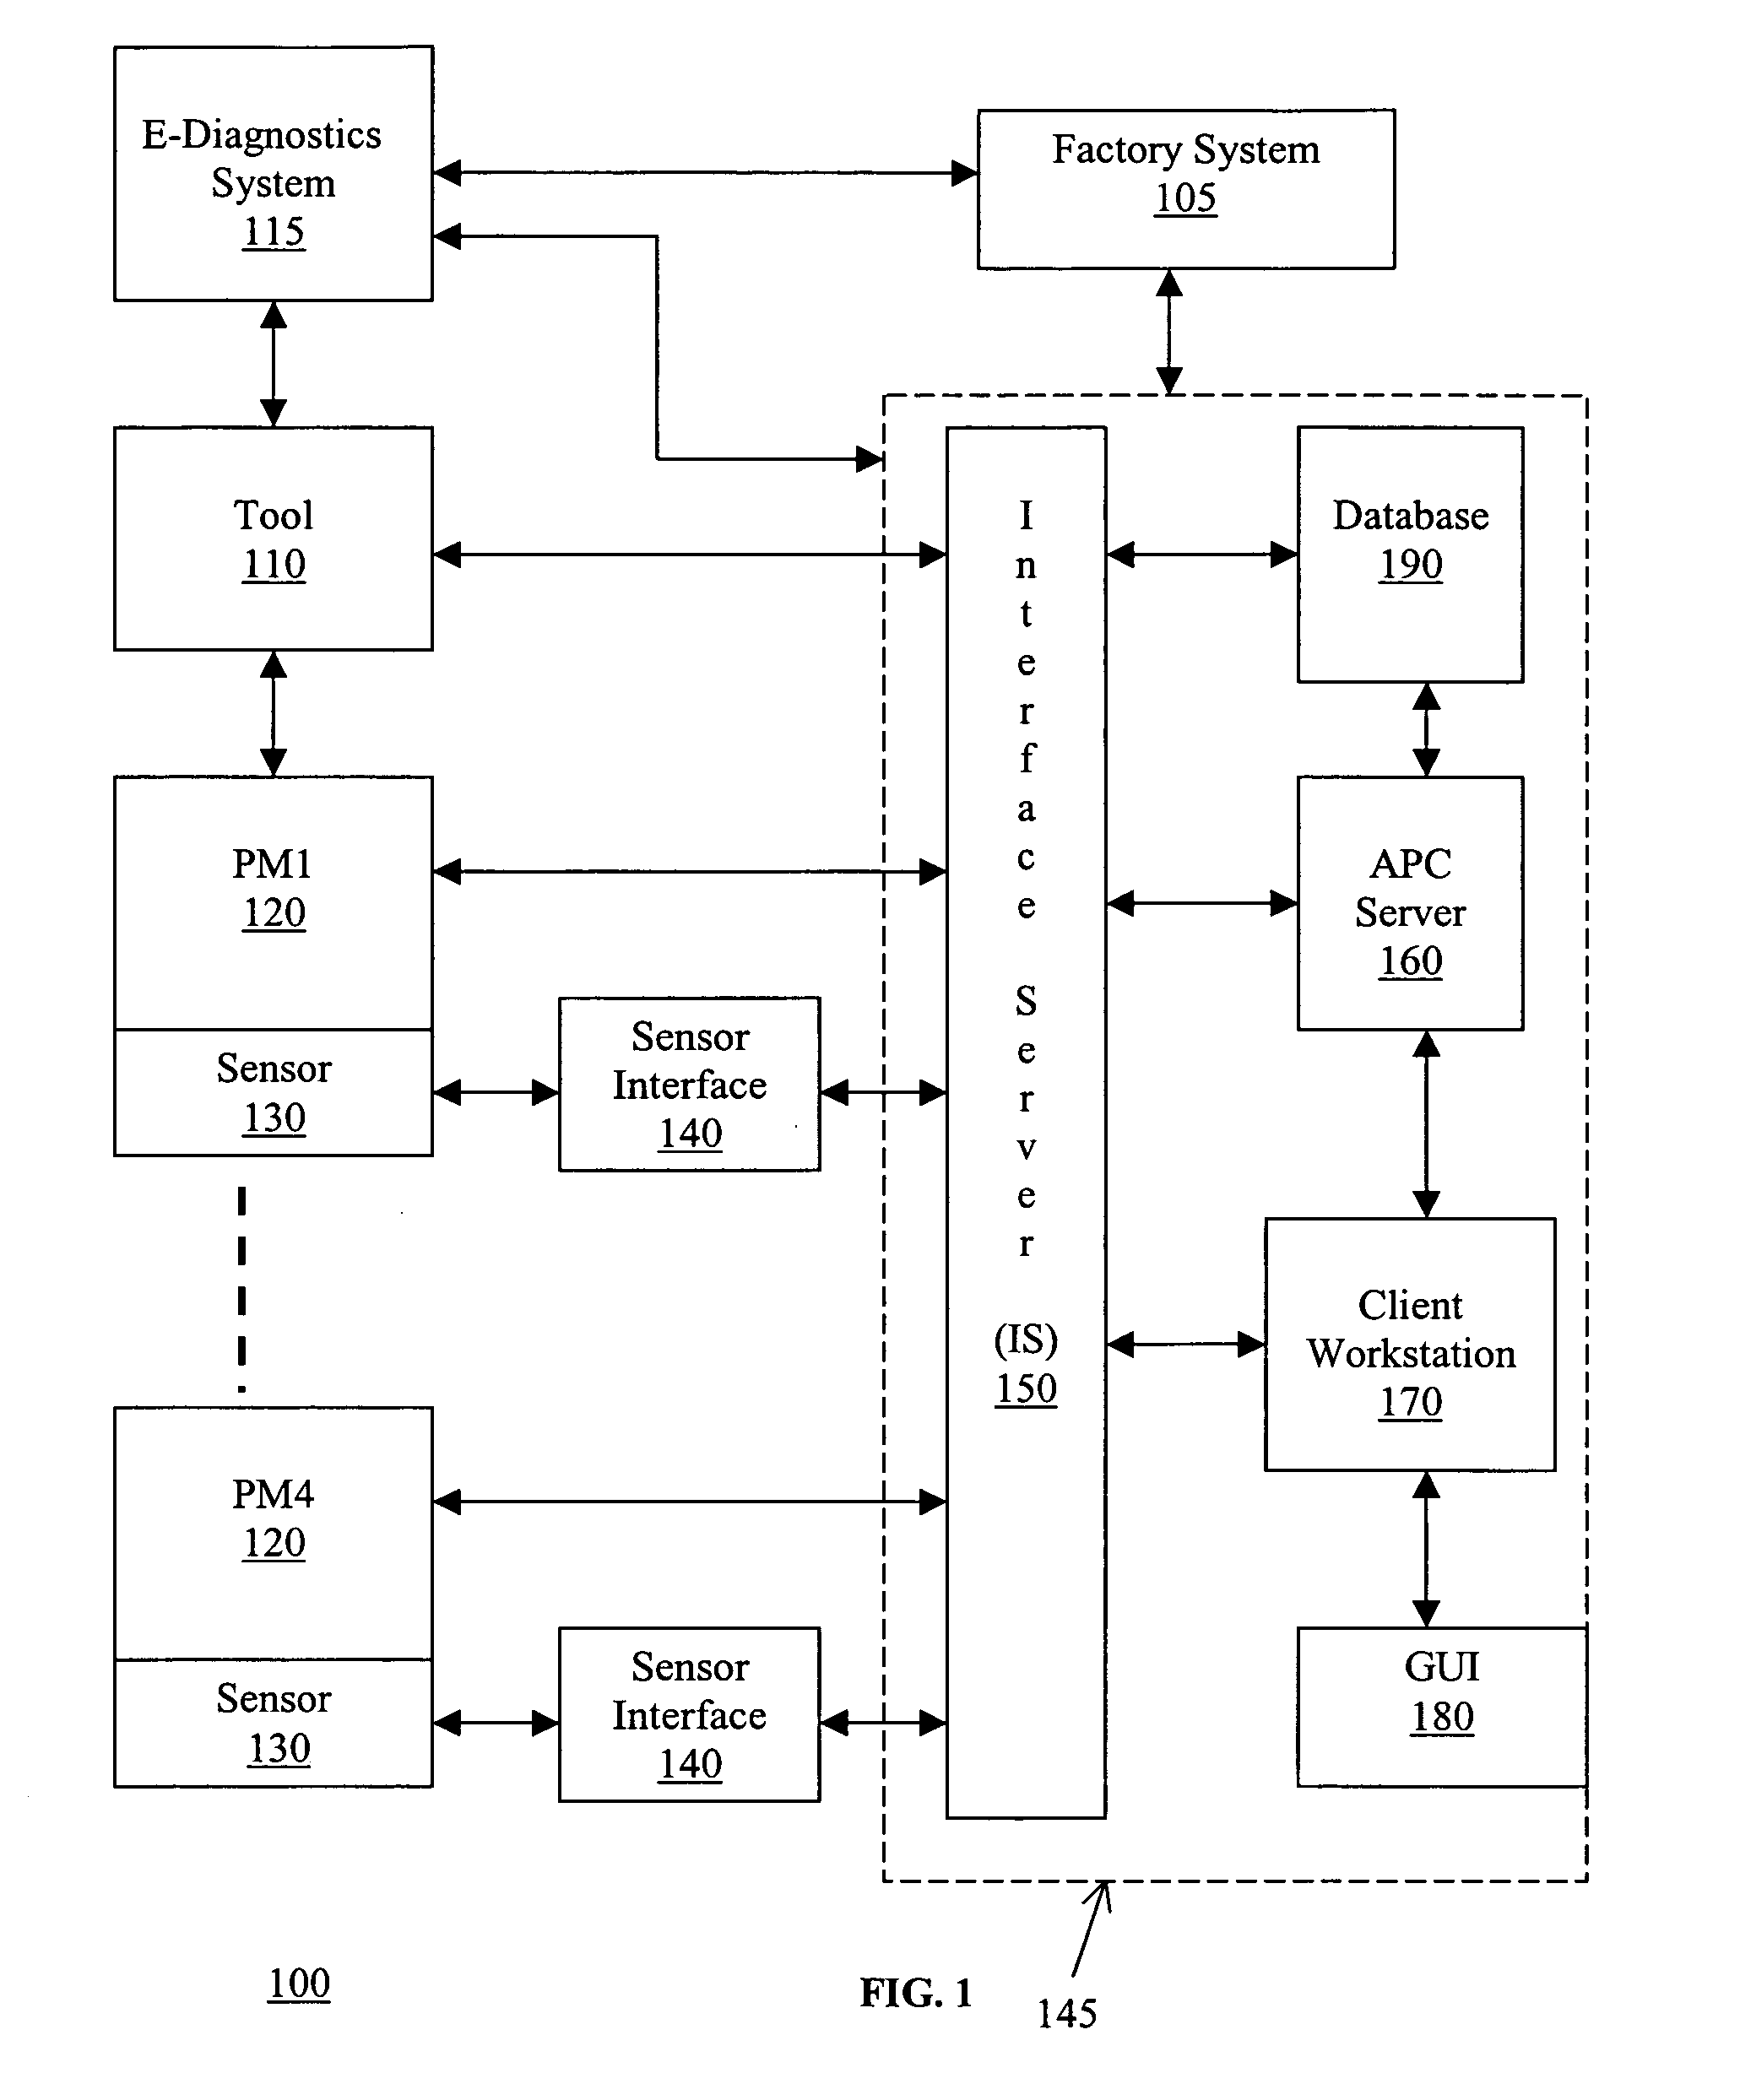 Method for processing data based on the data context